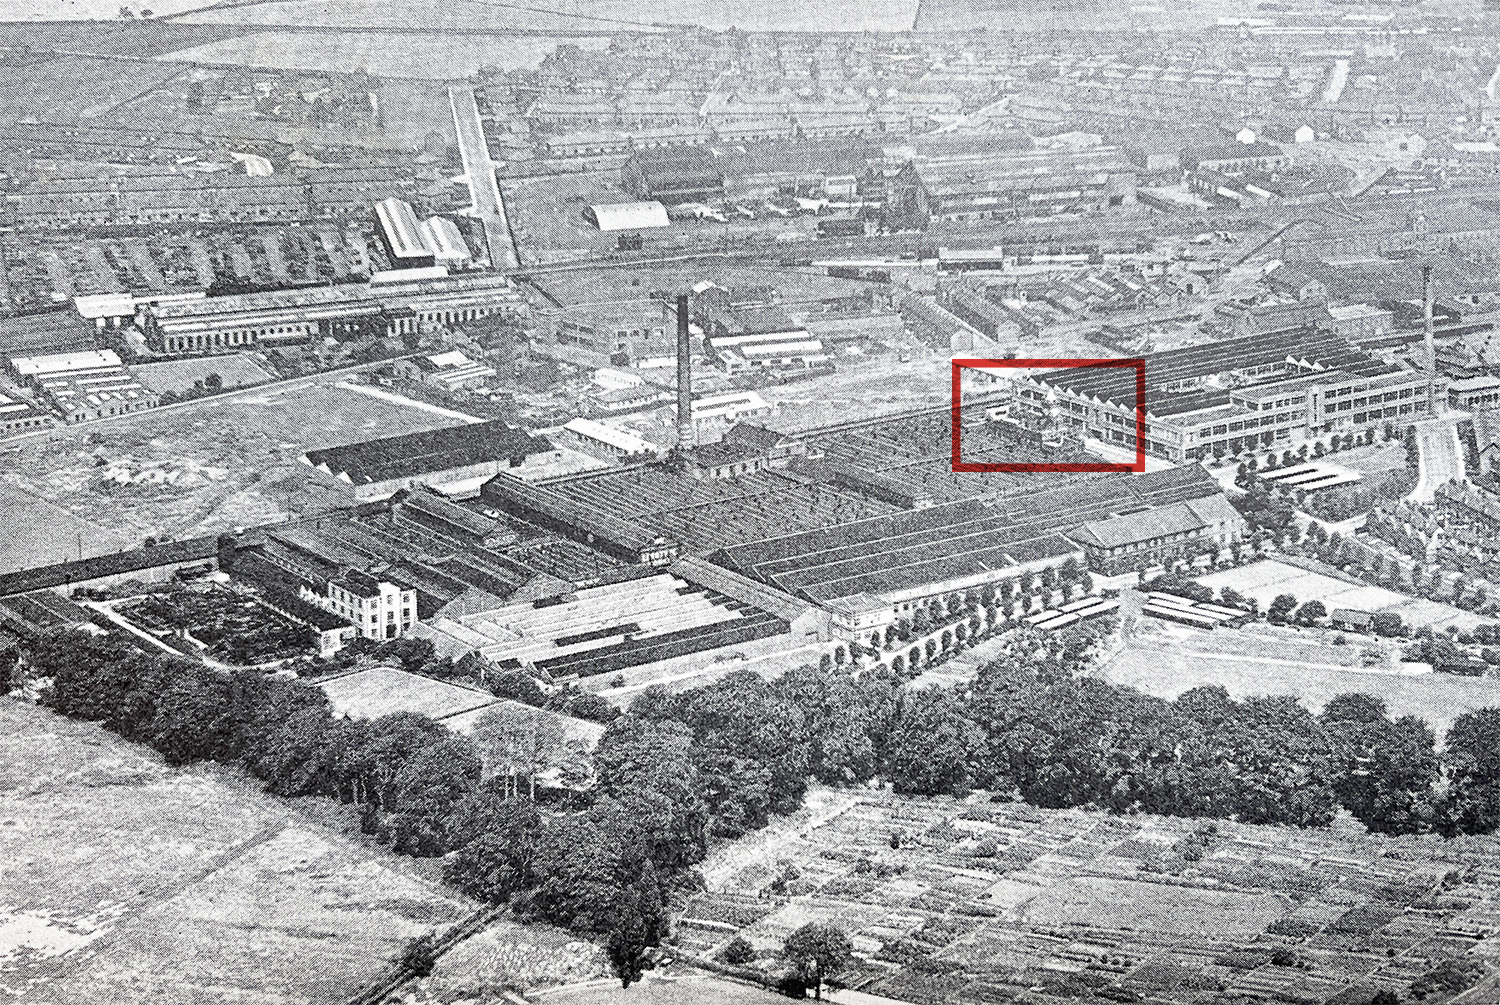 An aerial photo from 20 years later (1951) showing the growth of the factory and other buildings. The red box highlights the admin building from the rear.